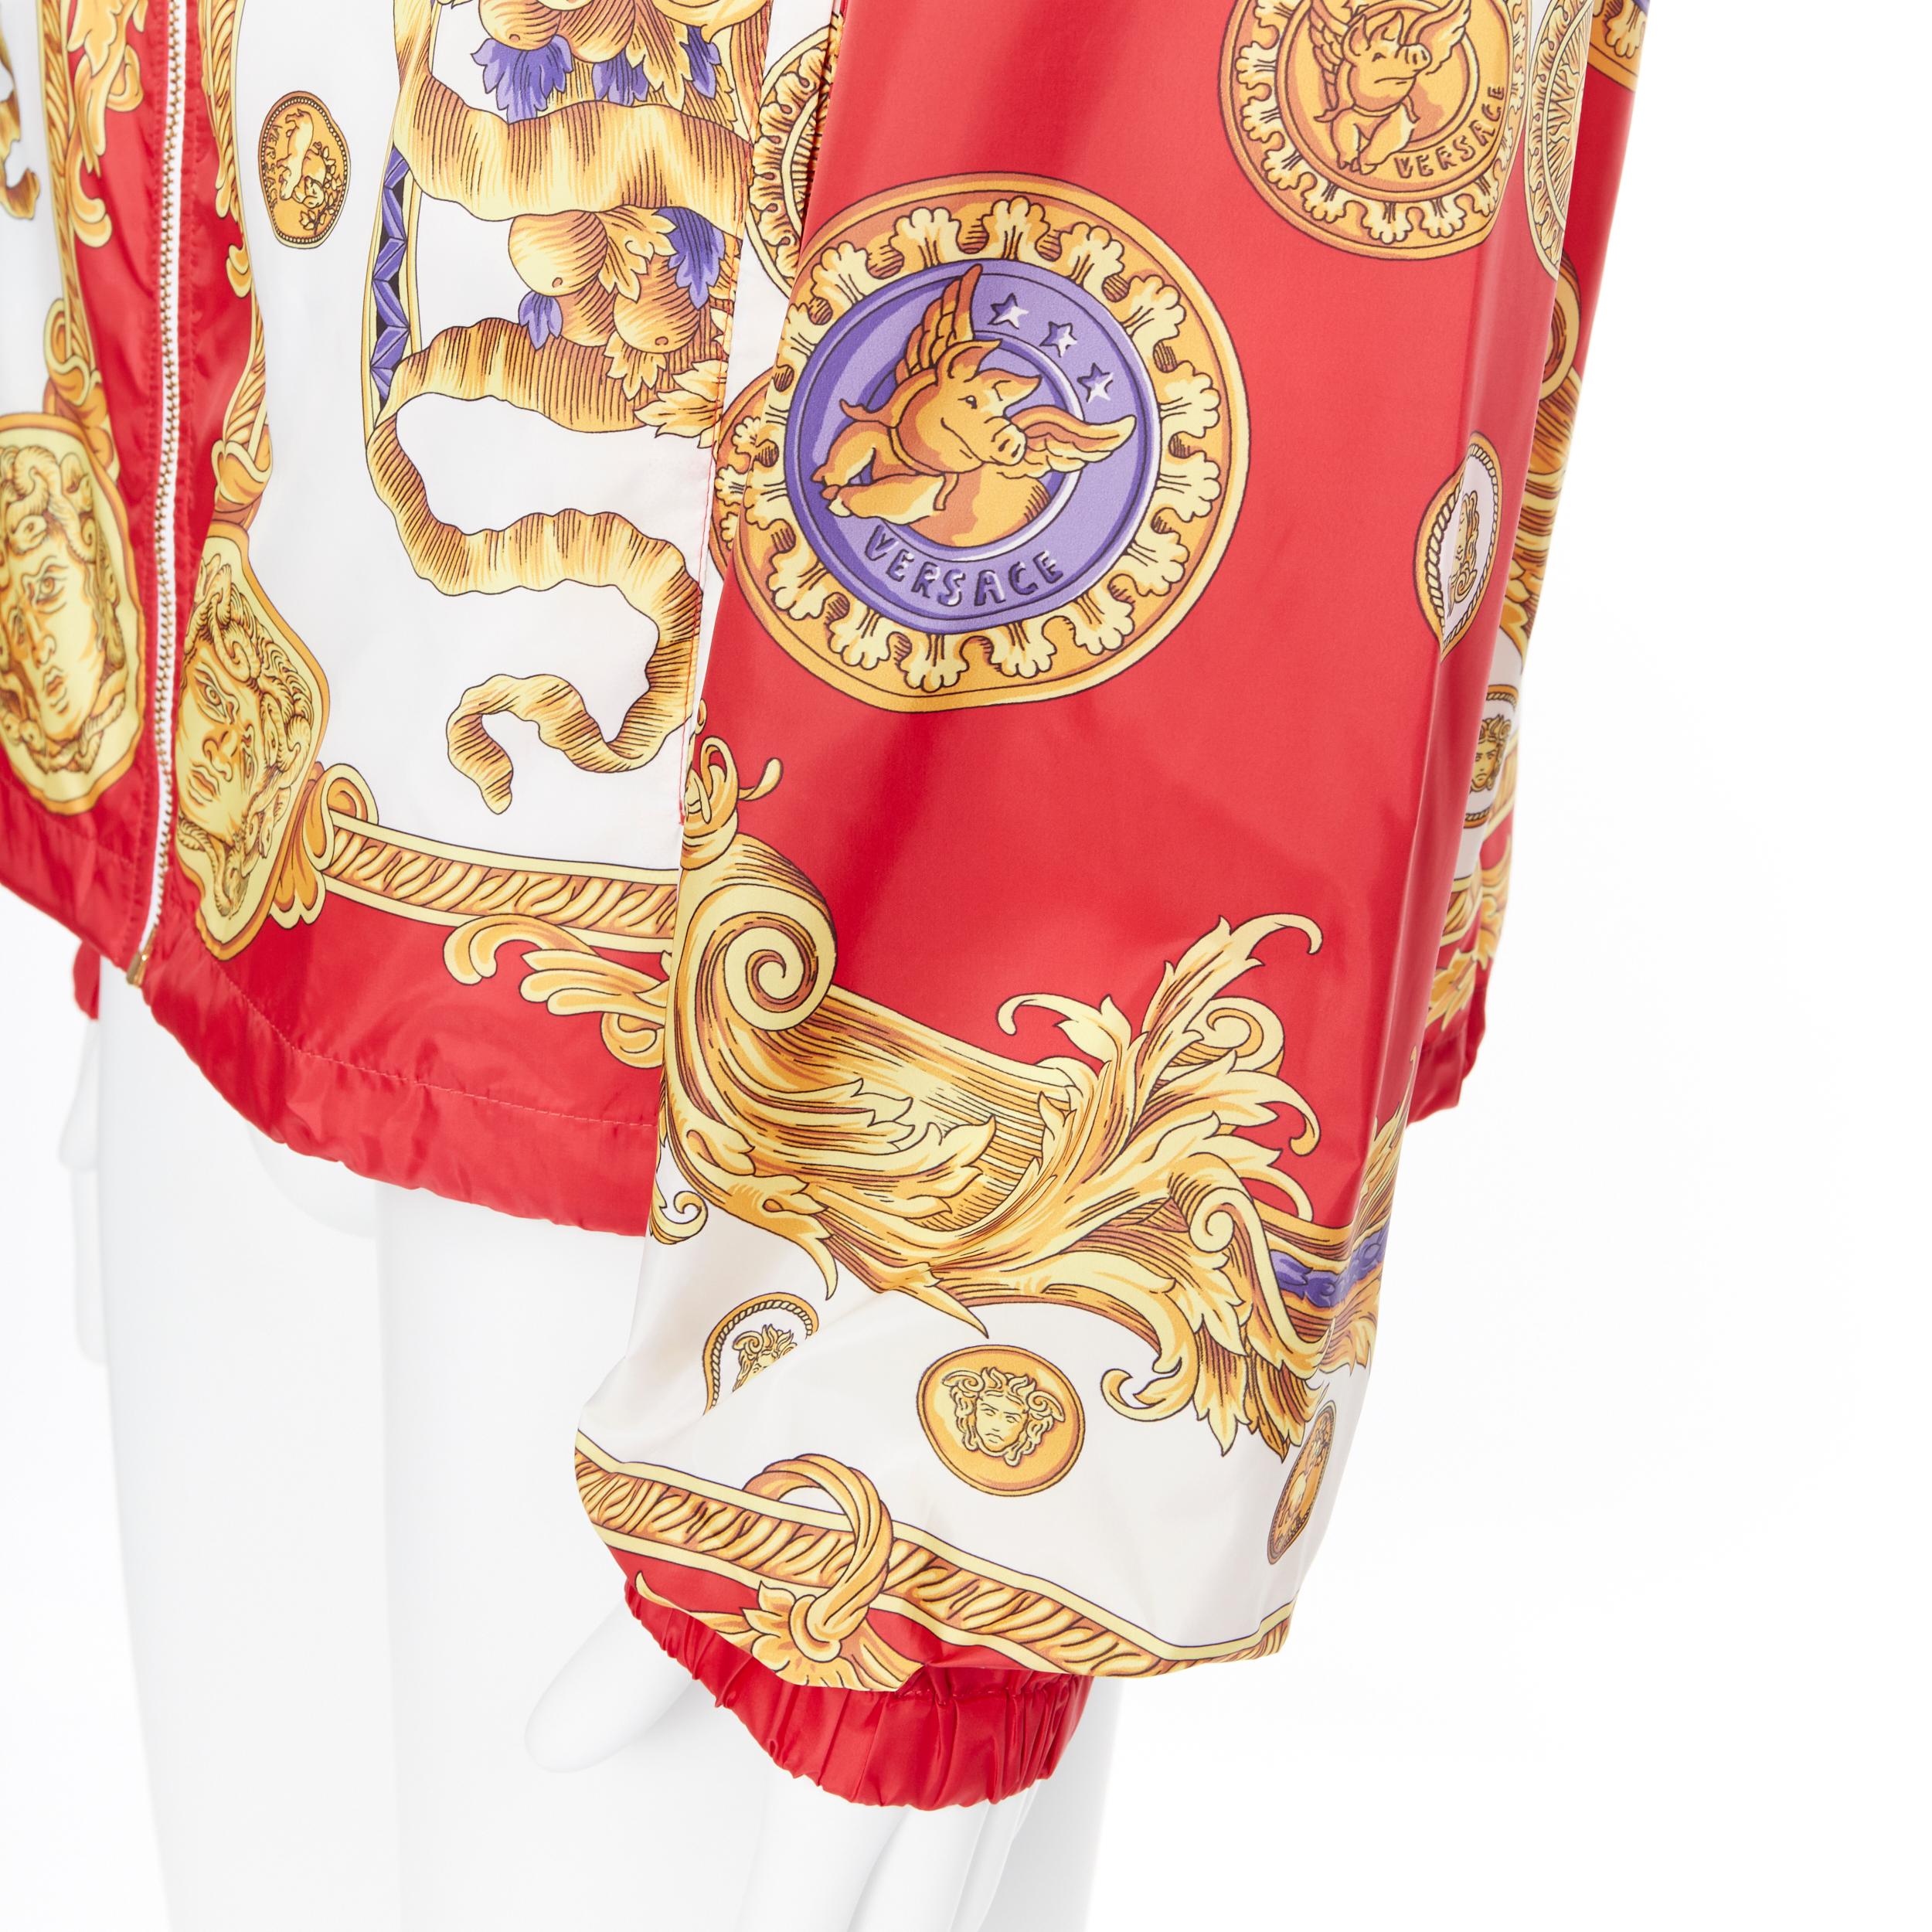 new VERSACE Limited Gold Pig Medusa Medallion Coin Baroque print hoodie IT56 3XL 4